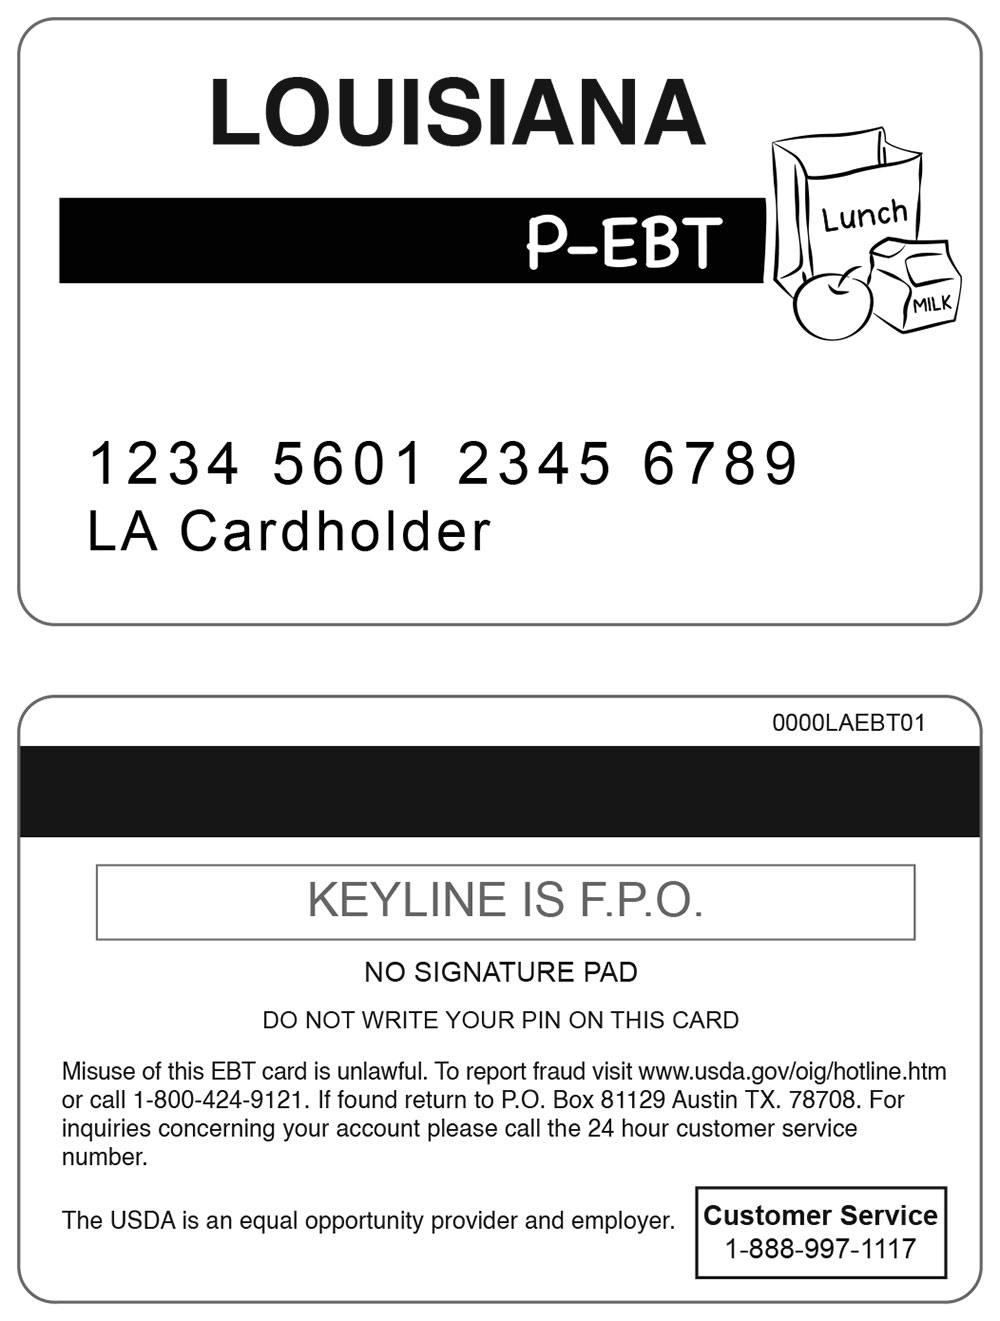 What Can I Use My Pebt Card For